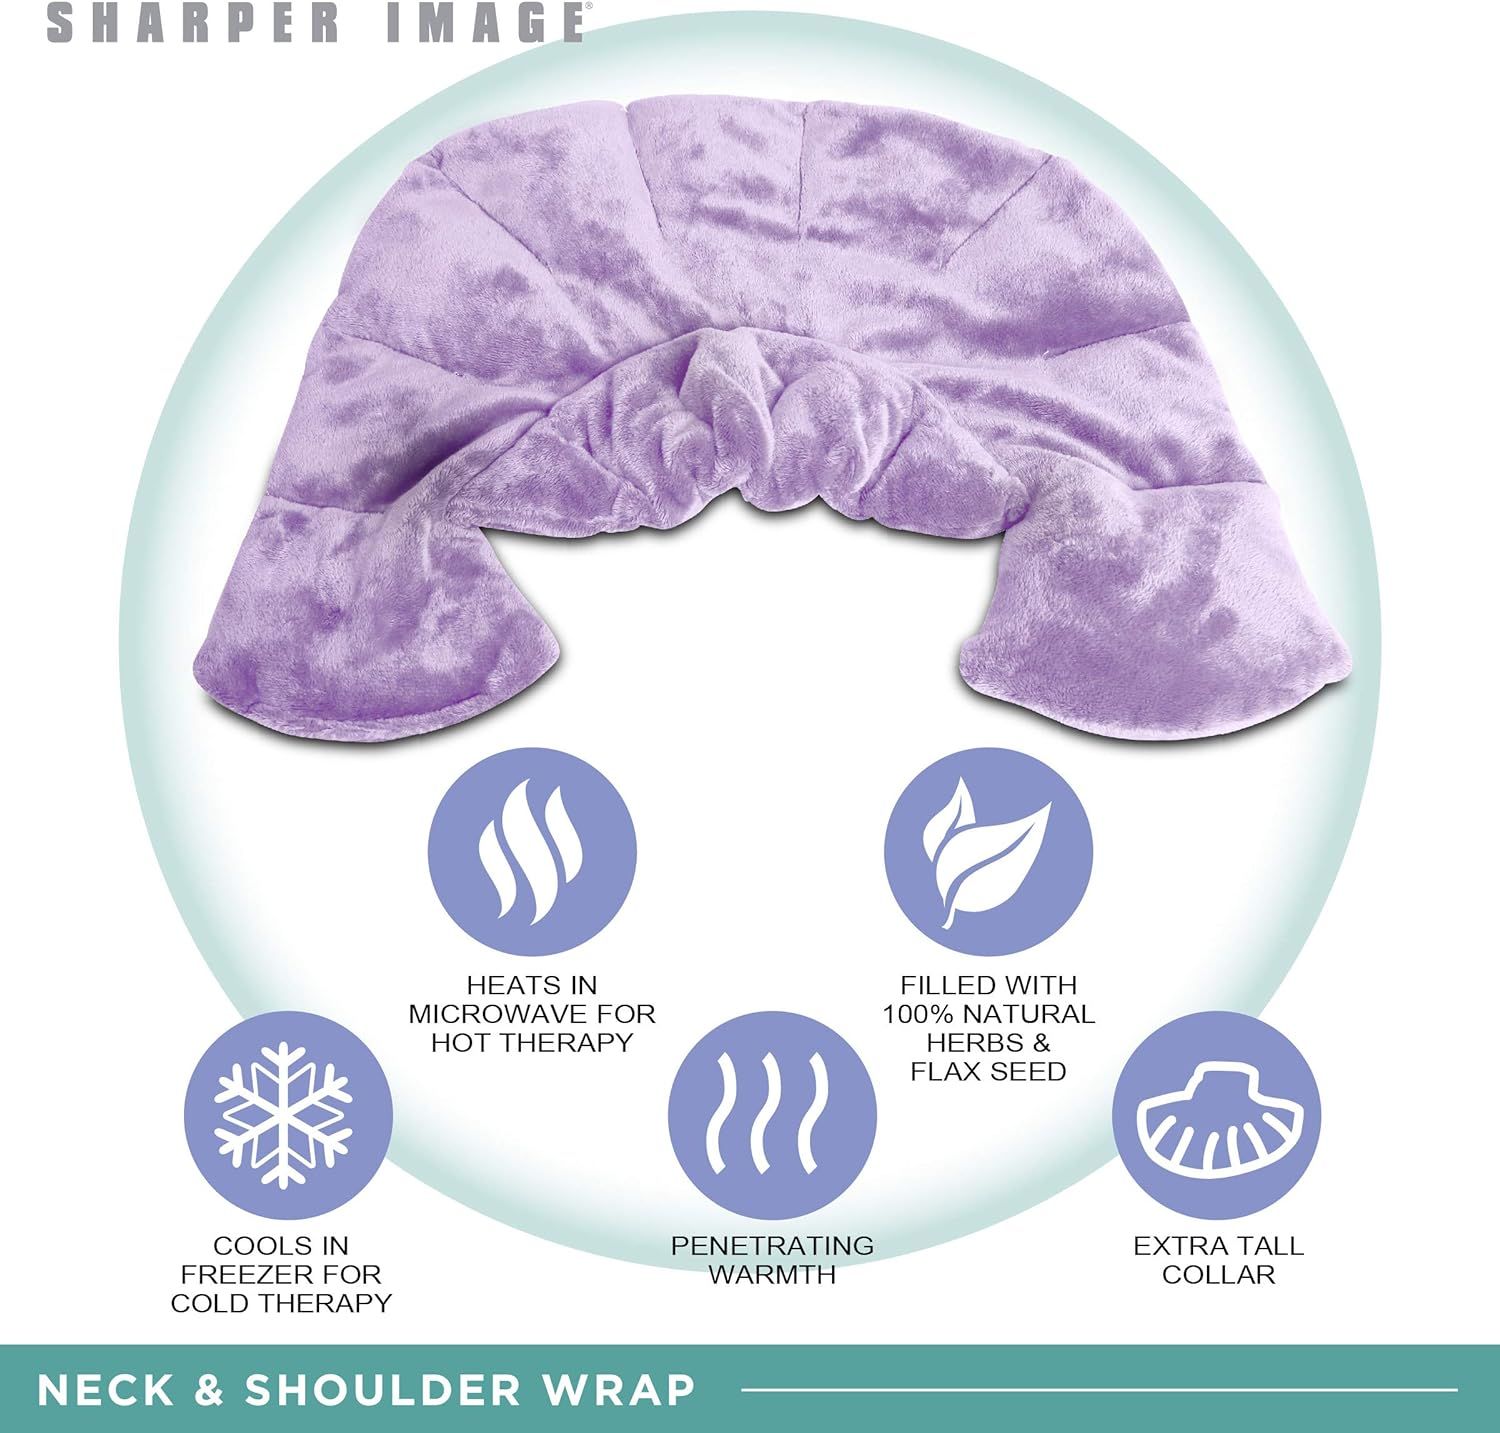 SHARPER IMAGE Hot & Cold Herbal Aromatherapy Neck & Shoulder Plush Wrap Pad for Soothing Muscle P... | Amazon (US)